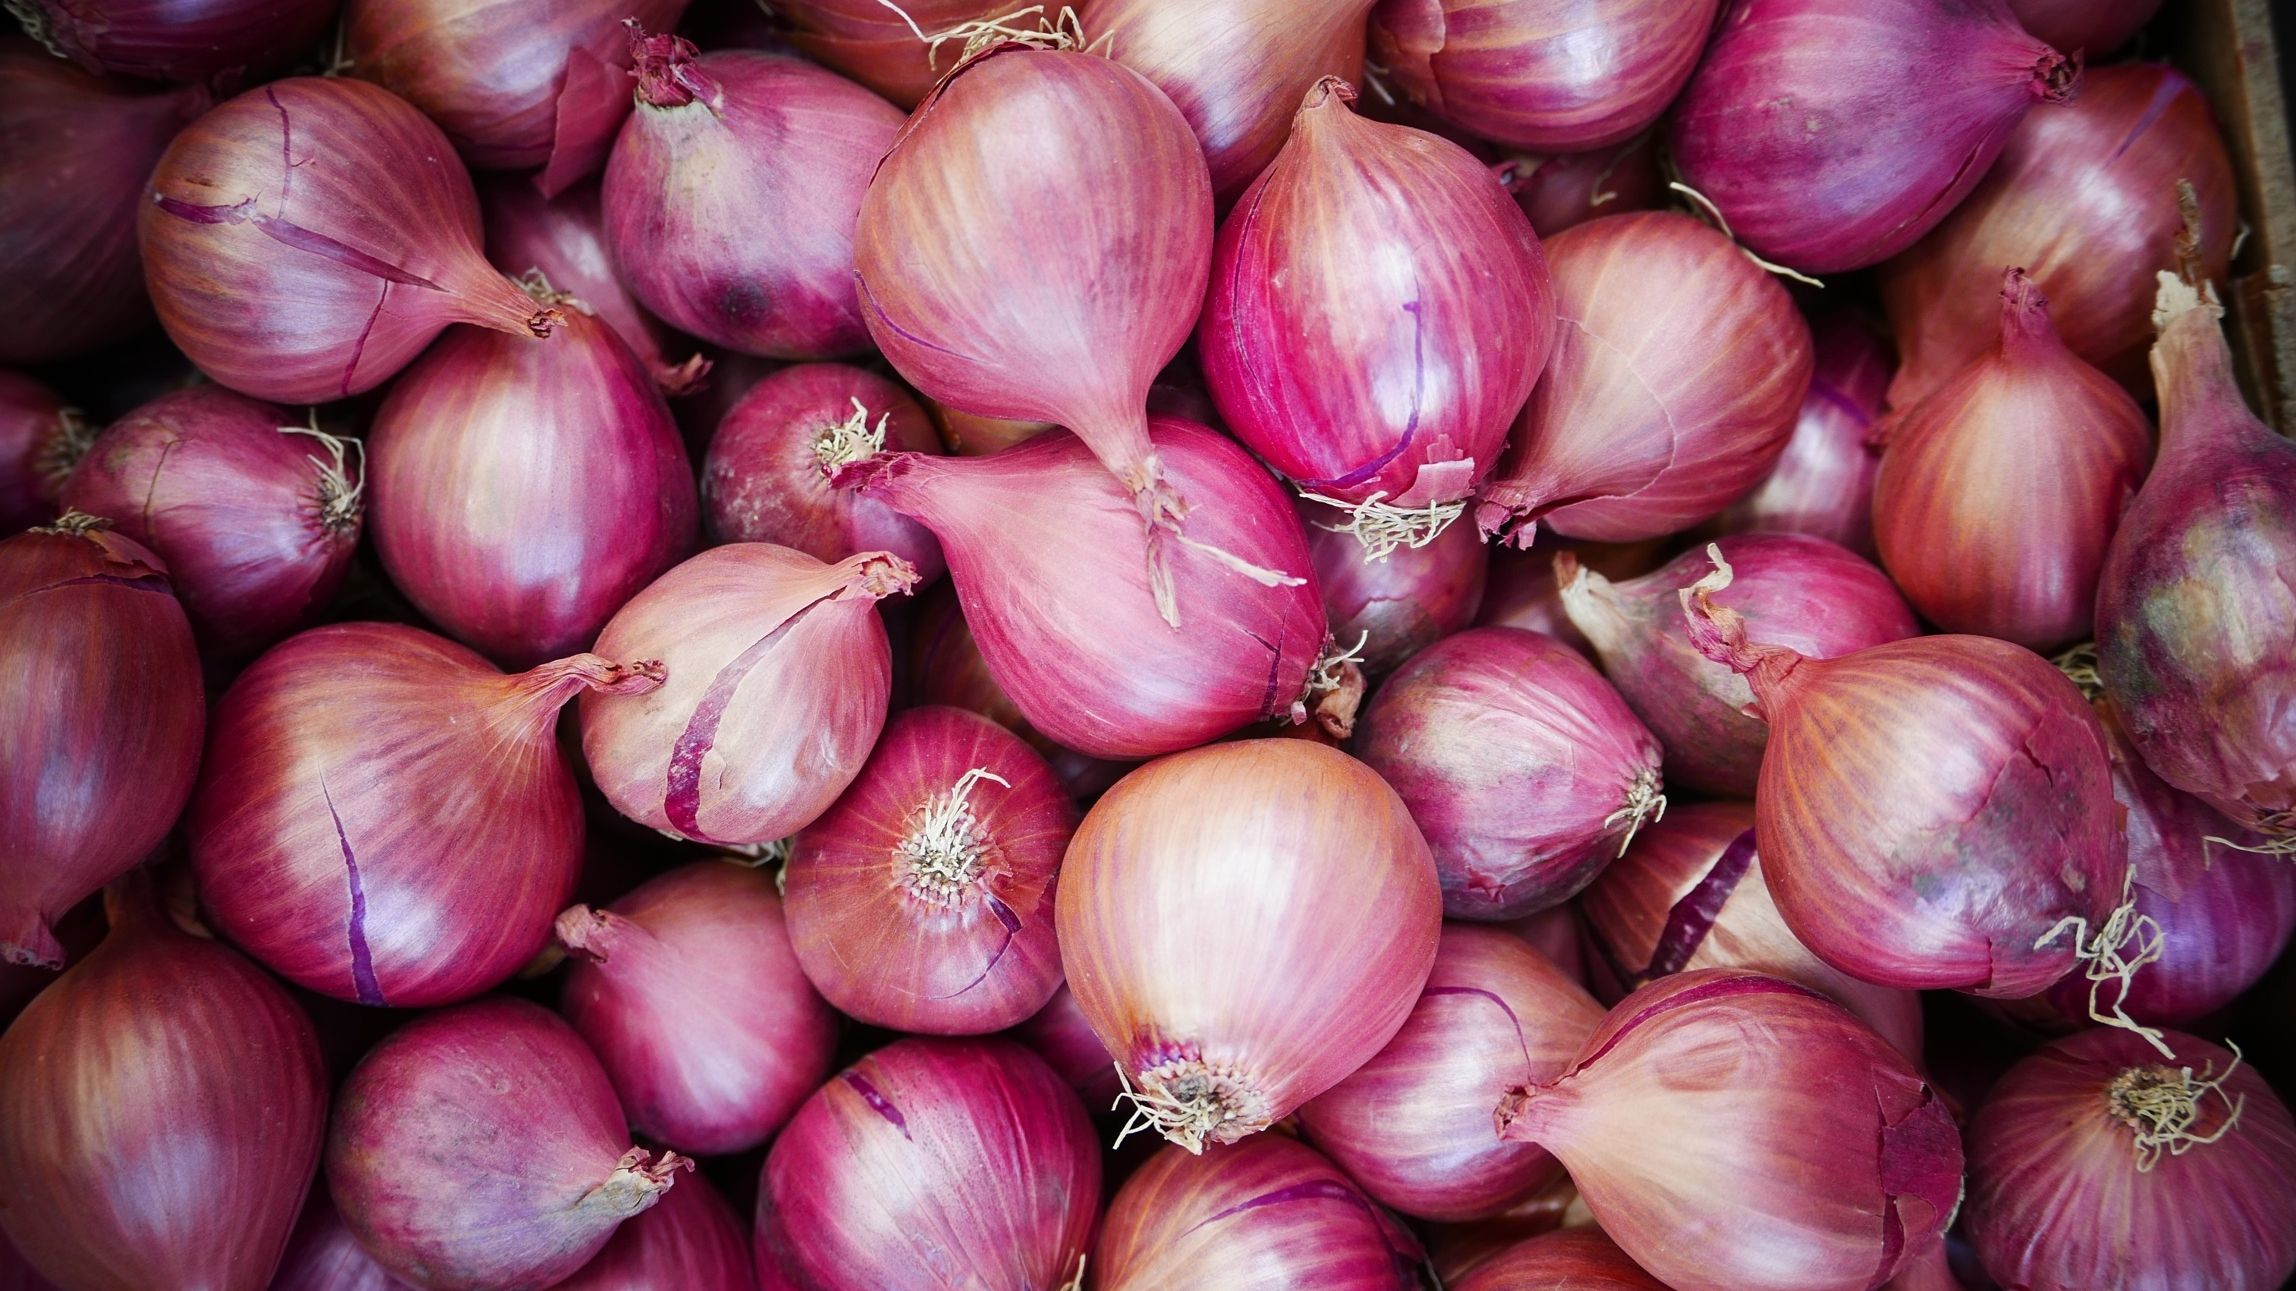  Red Onions to reduce Cholesterol: 